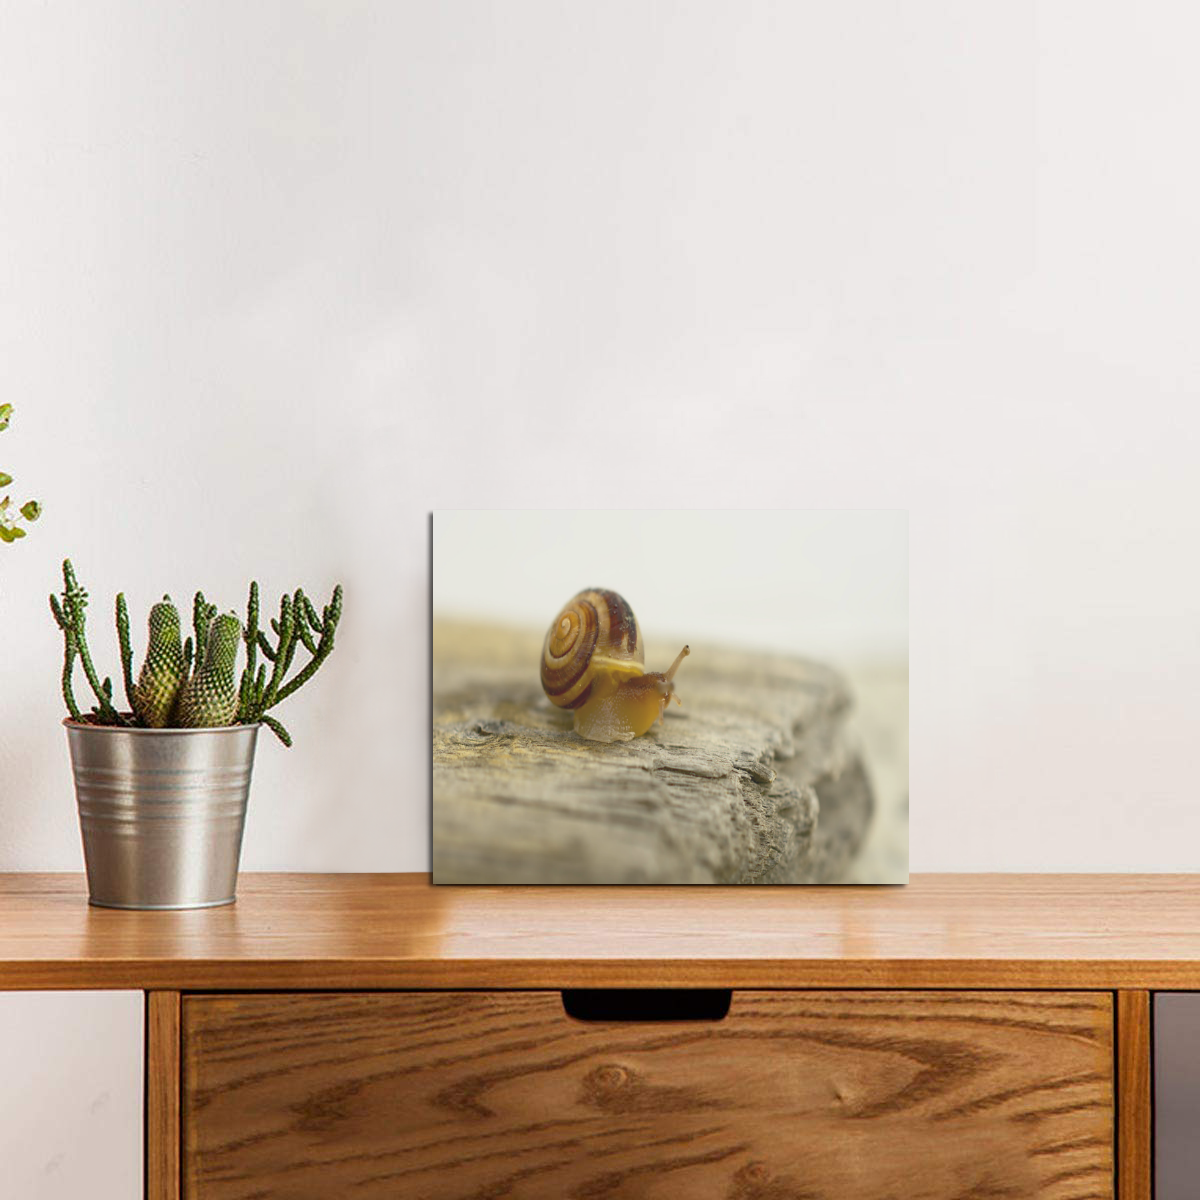 Solitary Snail Photo Panel for Tabletop Display 8"x6"